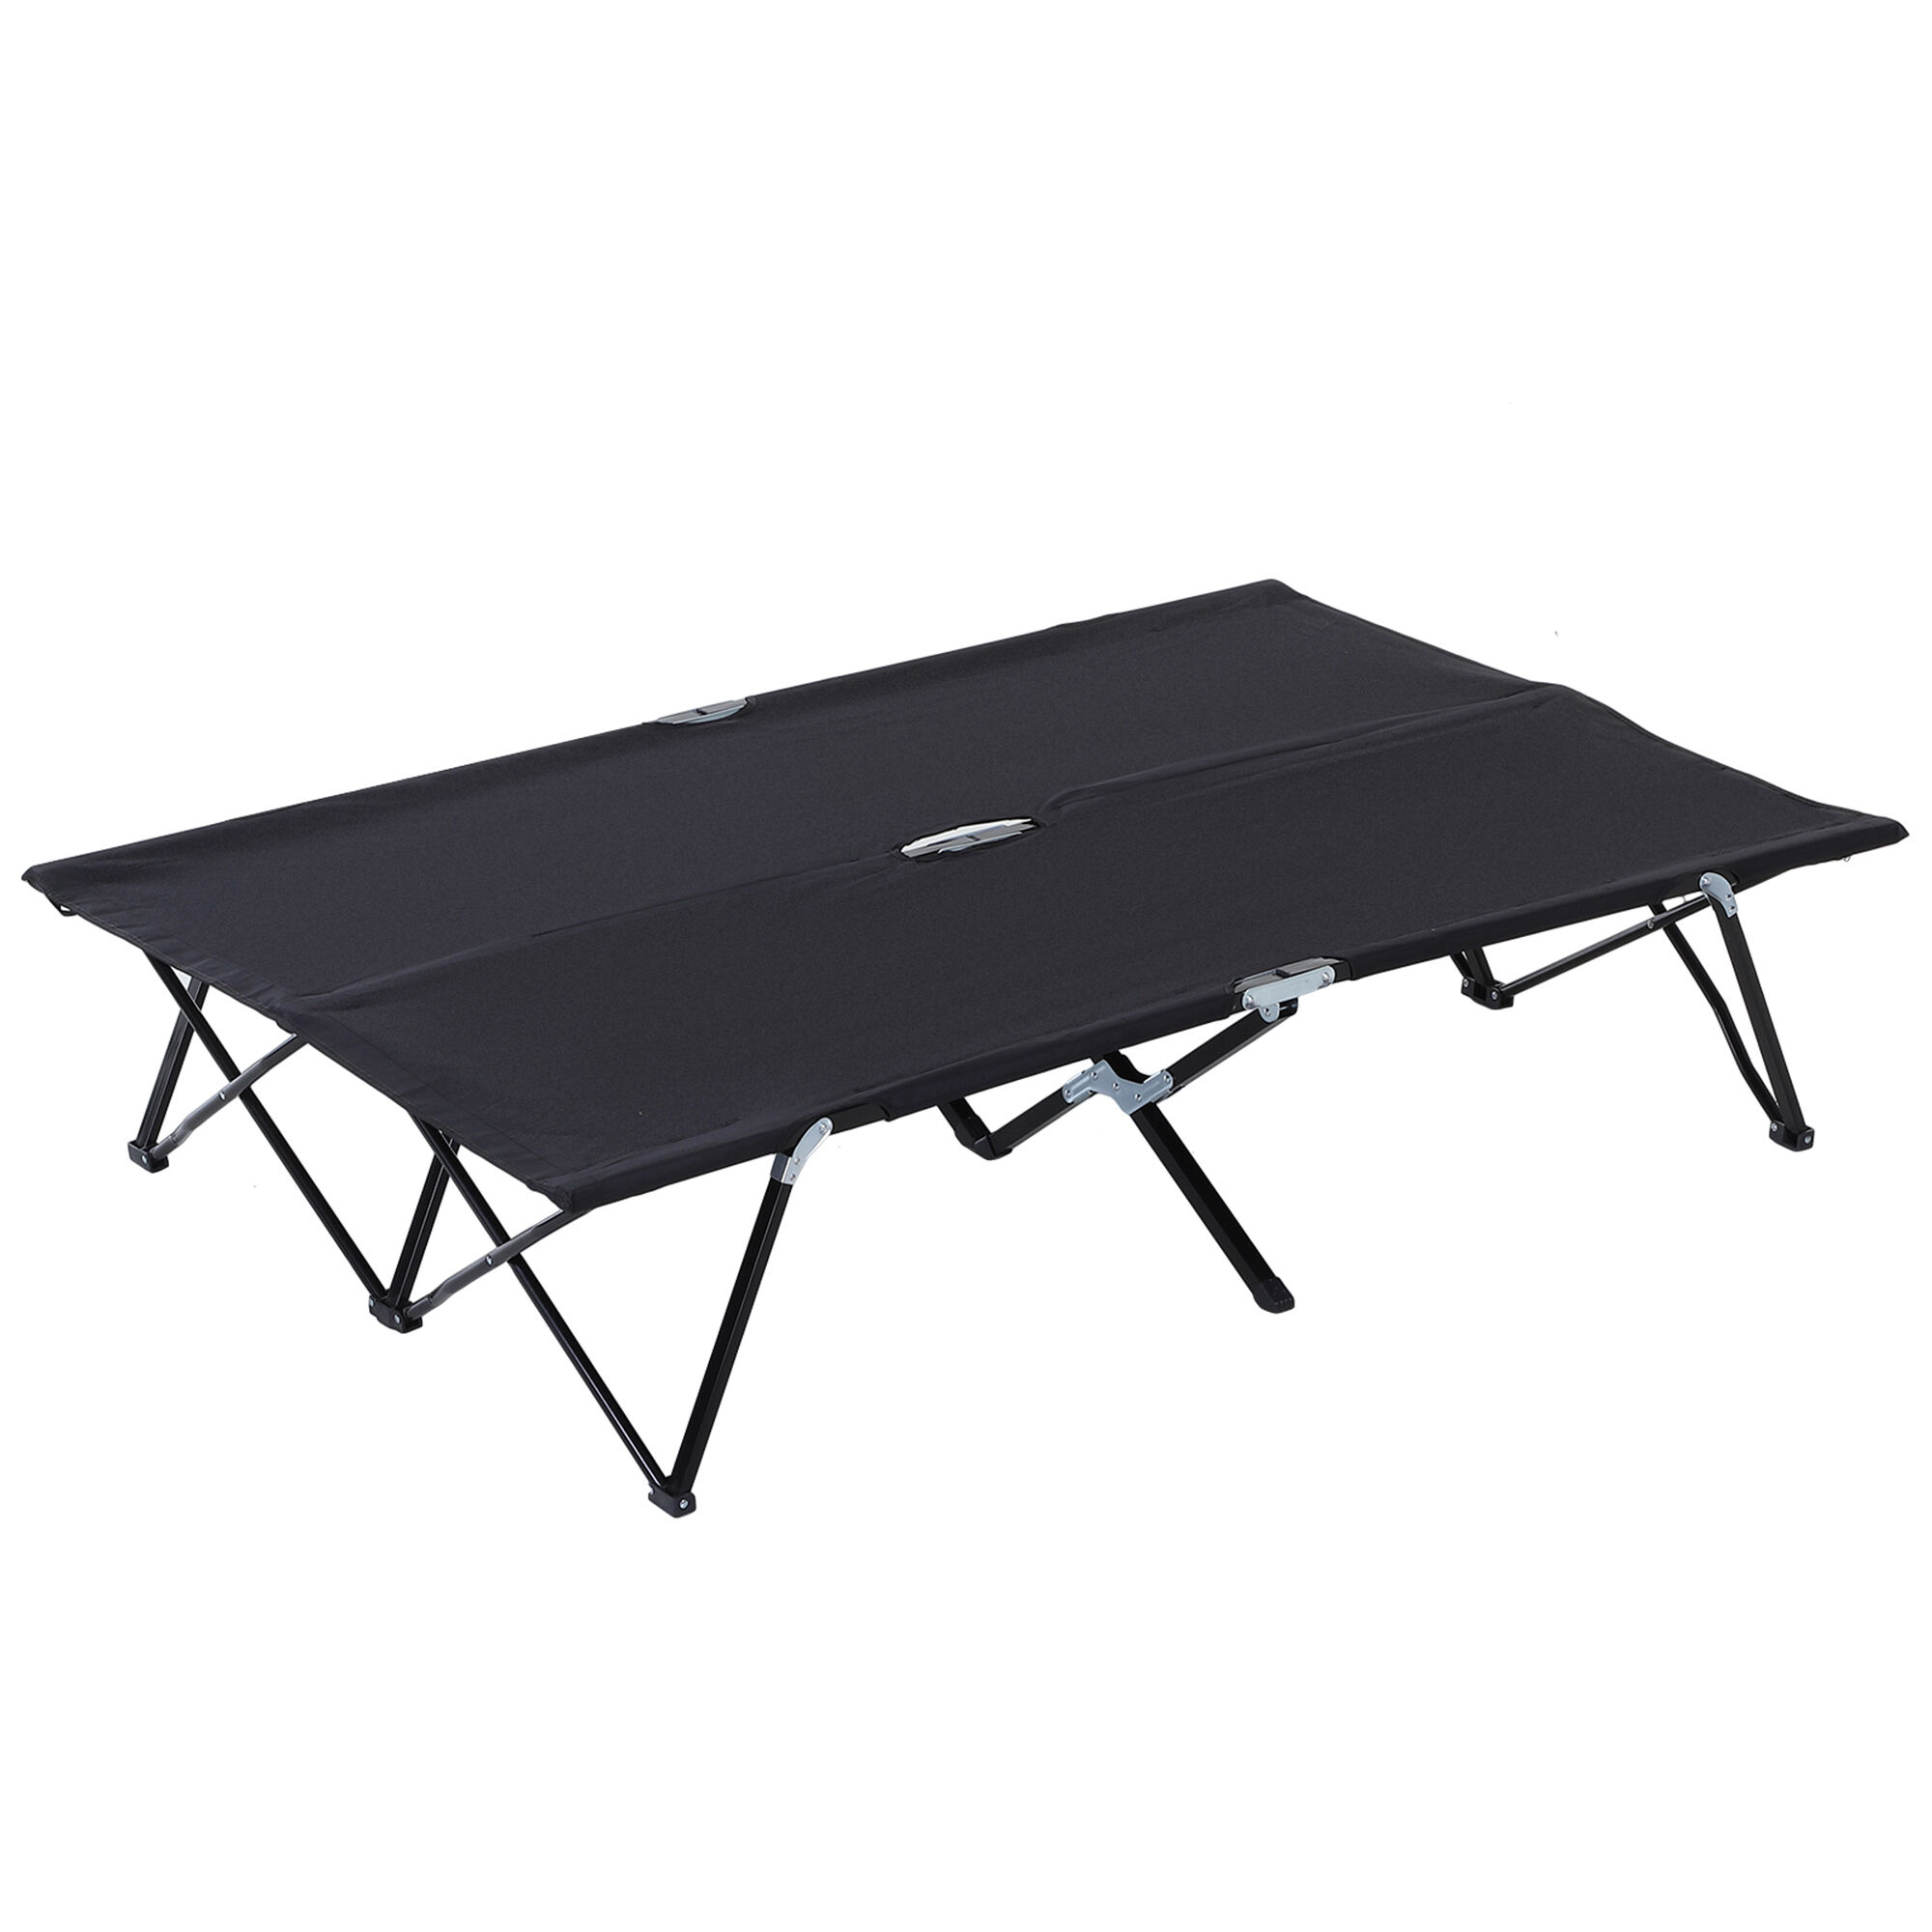 Outsunny 2 Person Folding Camping Cot for Adults, 50" Extra Wide Outdoor Portable Sleeping Cot with Carry Bag, Elevated Camping Bed, Beach Hiking